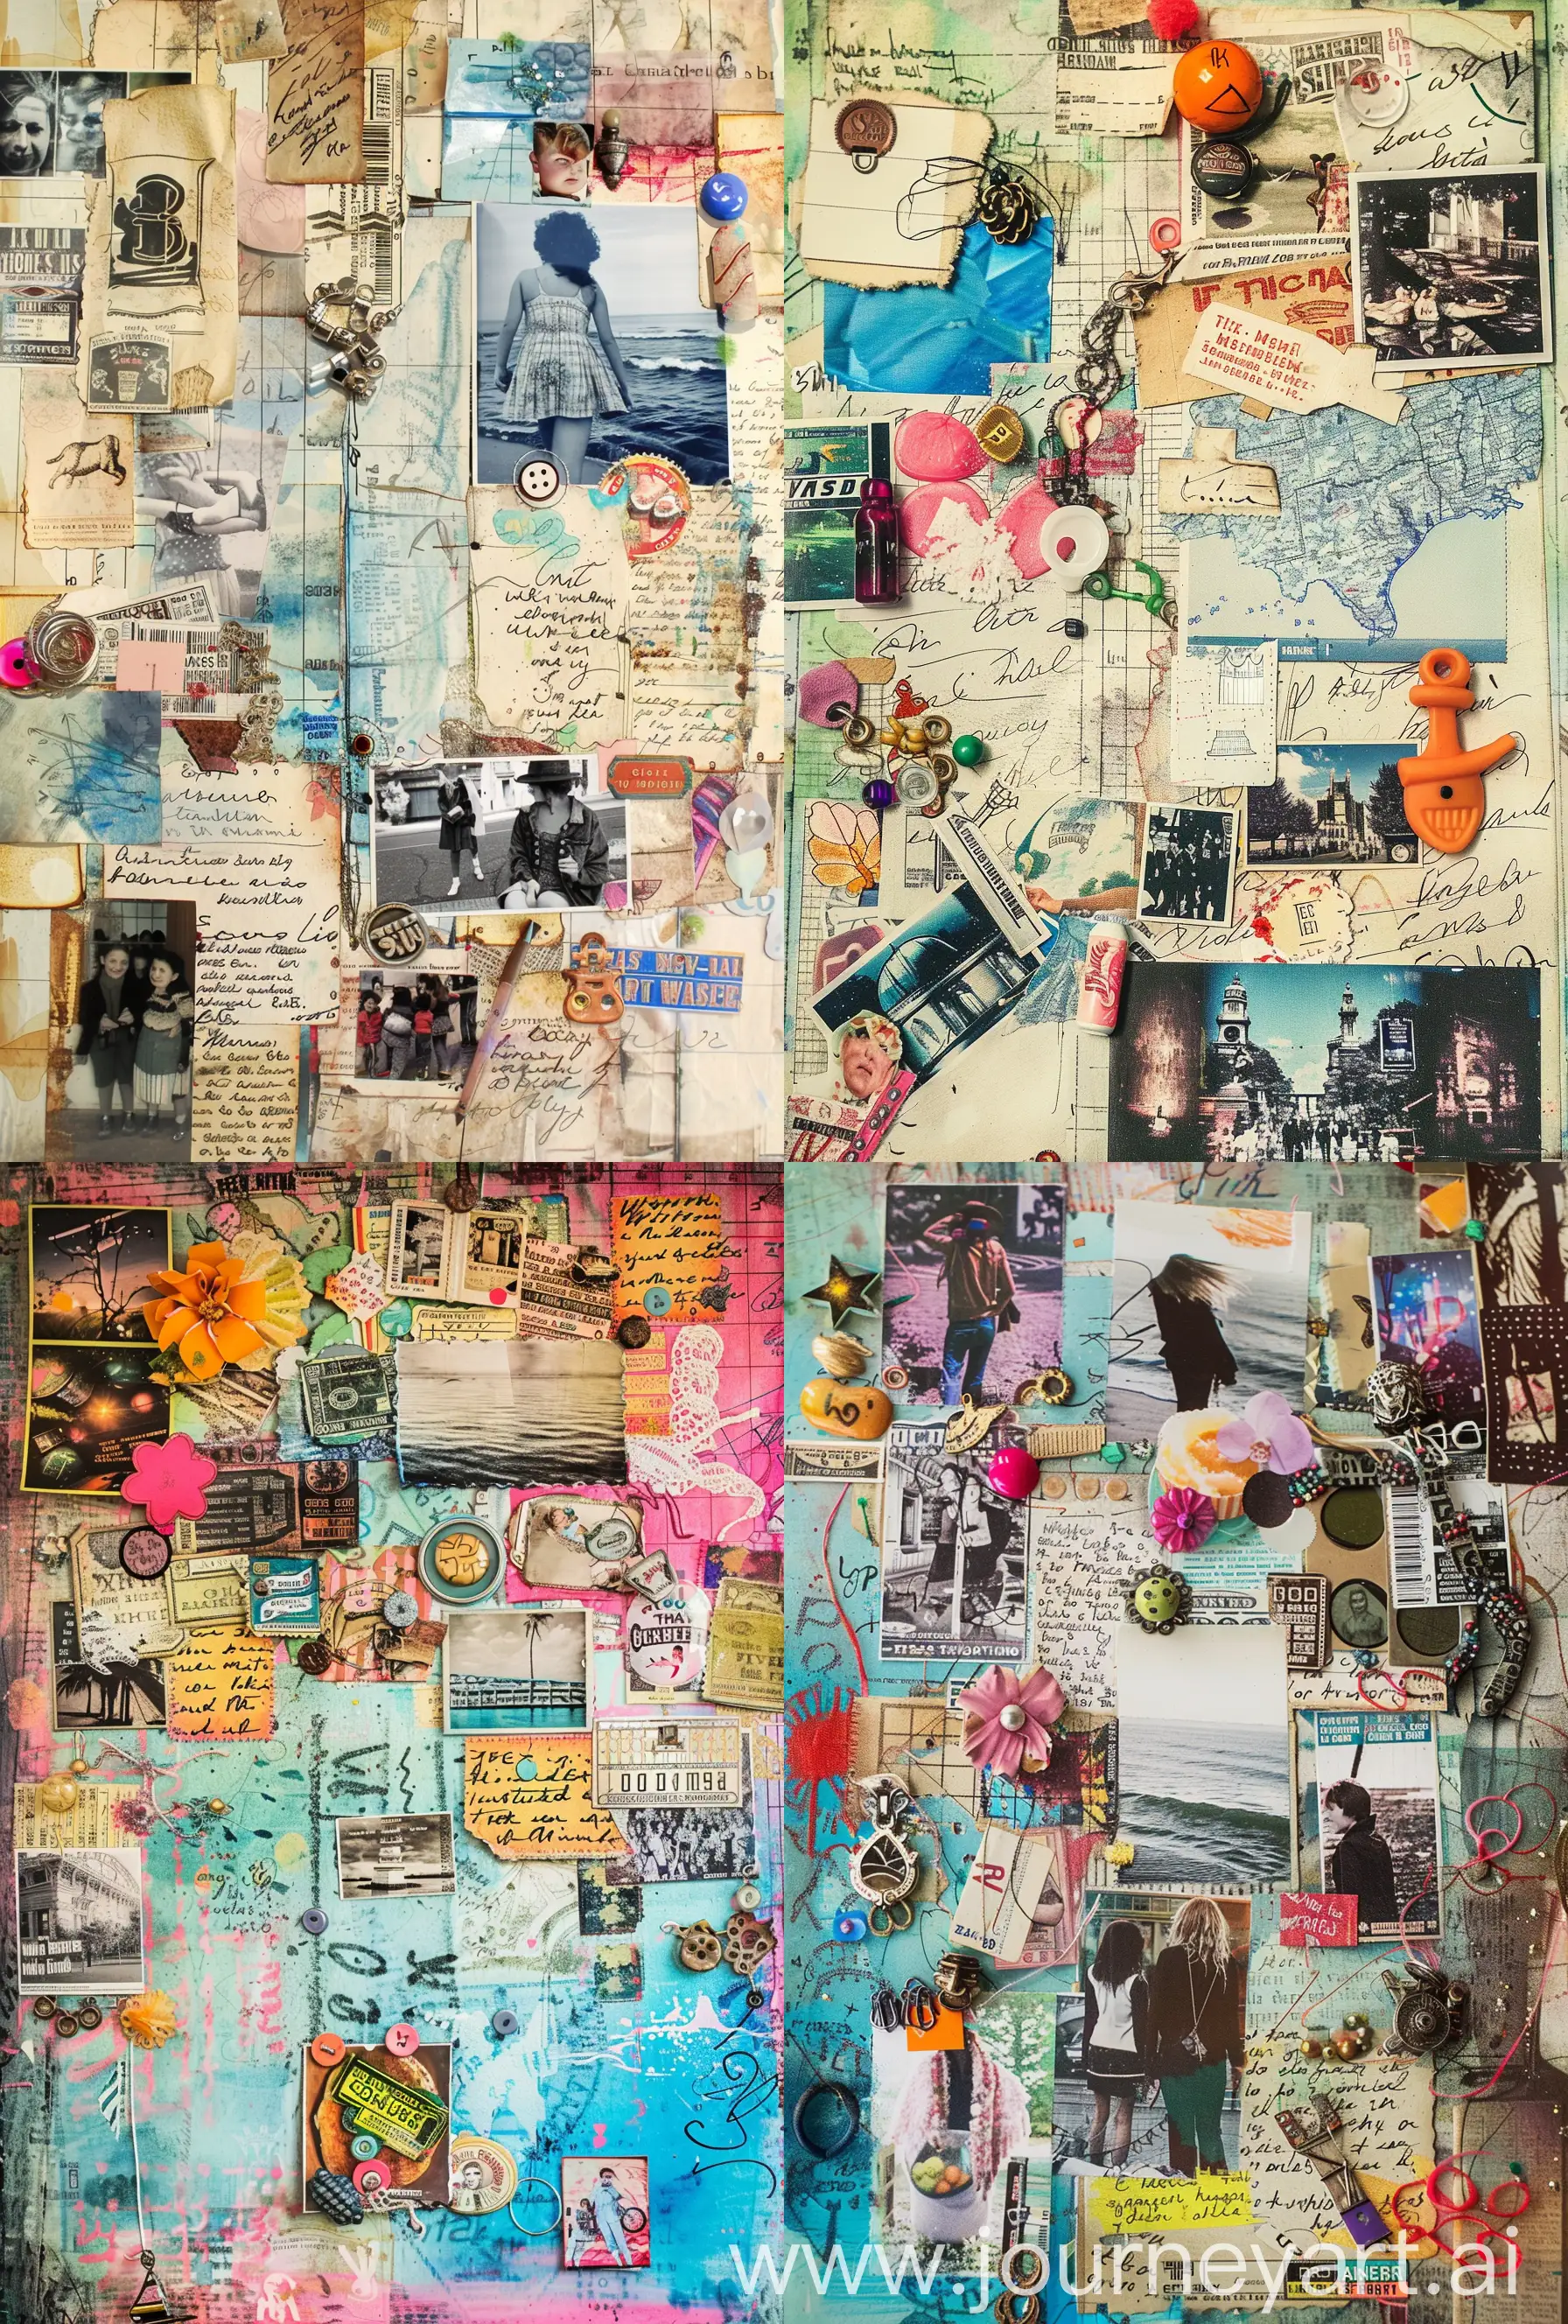 Whimsical Memories Collage: Combine snippets of photos, ticket stubs, and handwritten notes in a whimsical collage style, reminiscent of page. Add playful doodles and embellishments like trinkets and charms for a personalized touch --ar 43:64